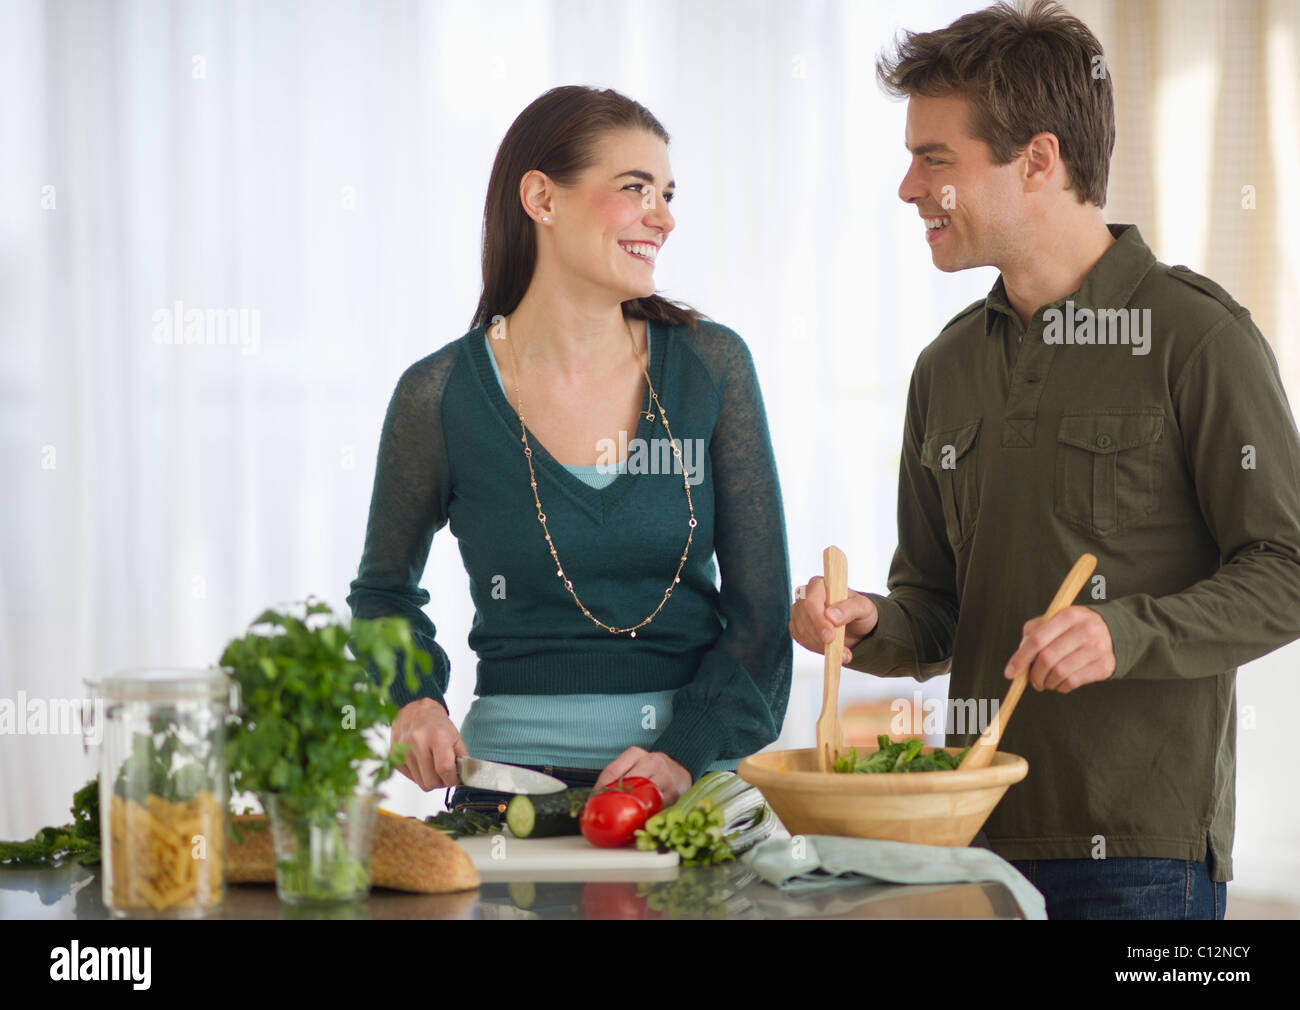 USA, New Jersey, Jersey City, Couple cooking in kitchen Banque D'Images